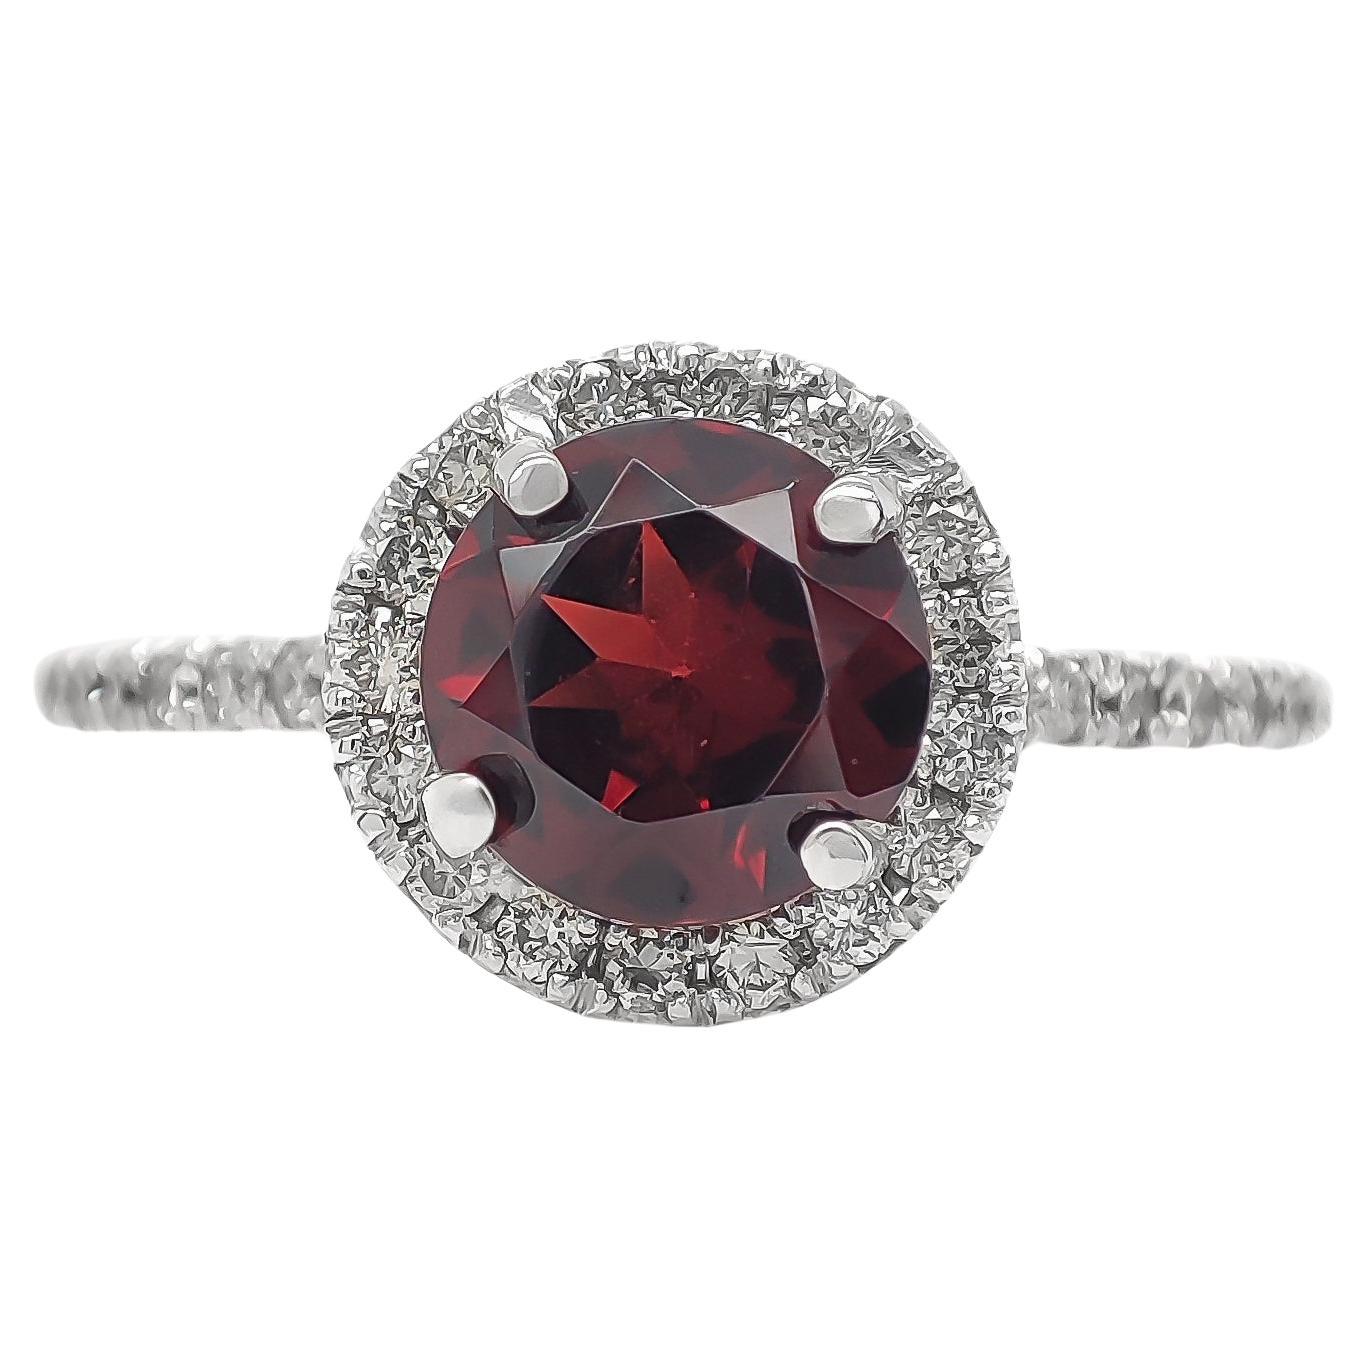 NO RESERVE 1.28CTW Garnet and Diamond Engagement Ring 14K White Gold For Sale